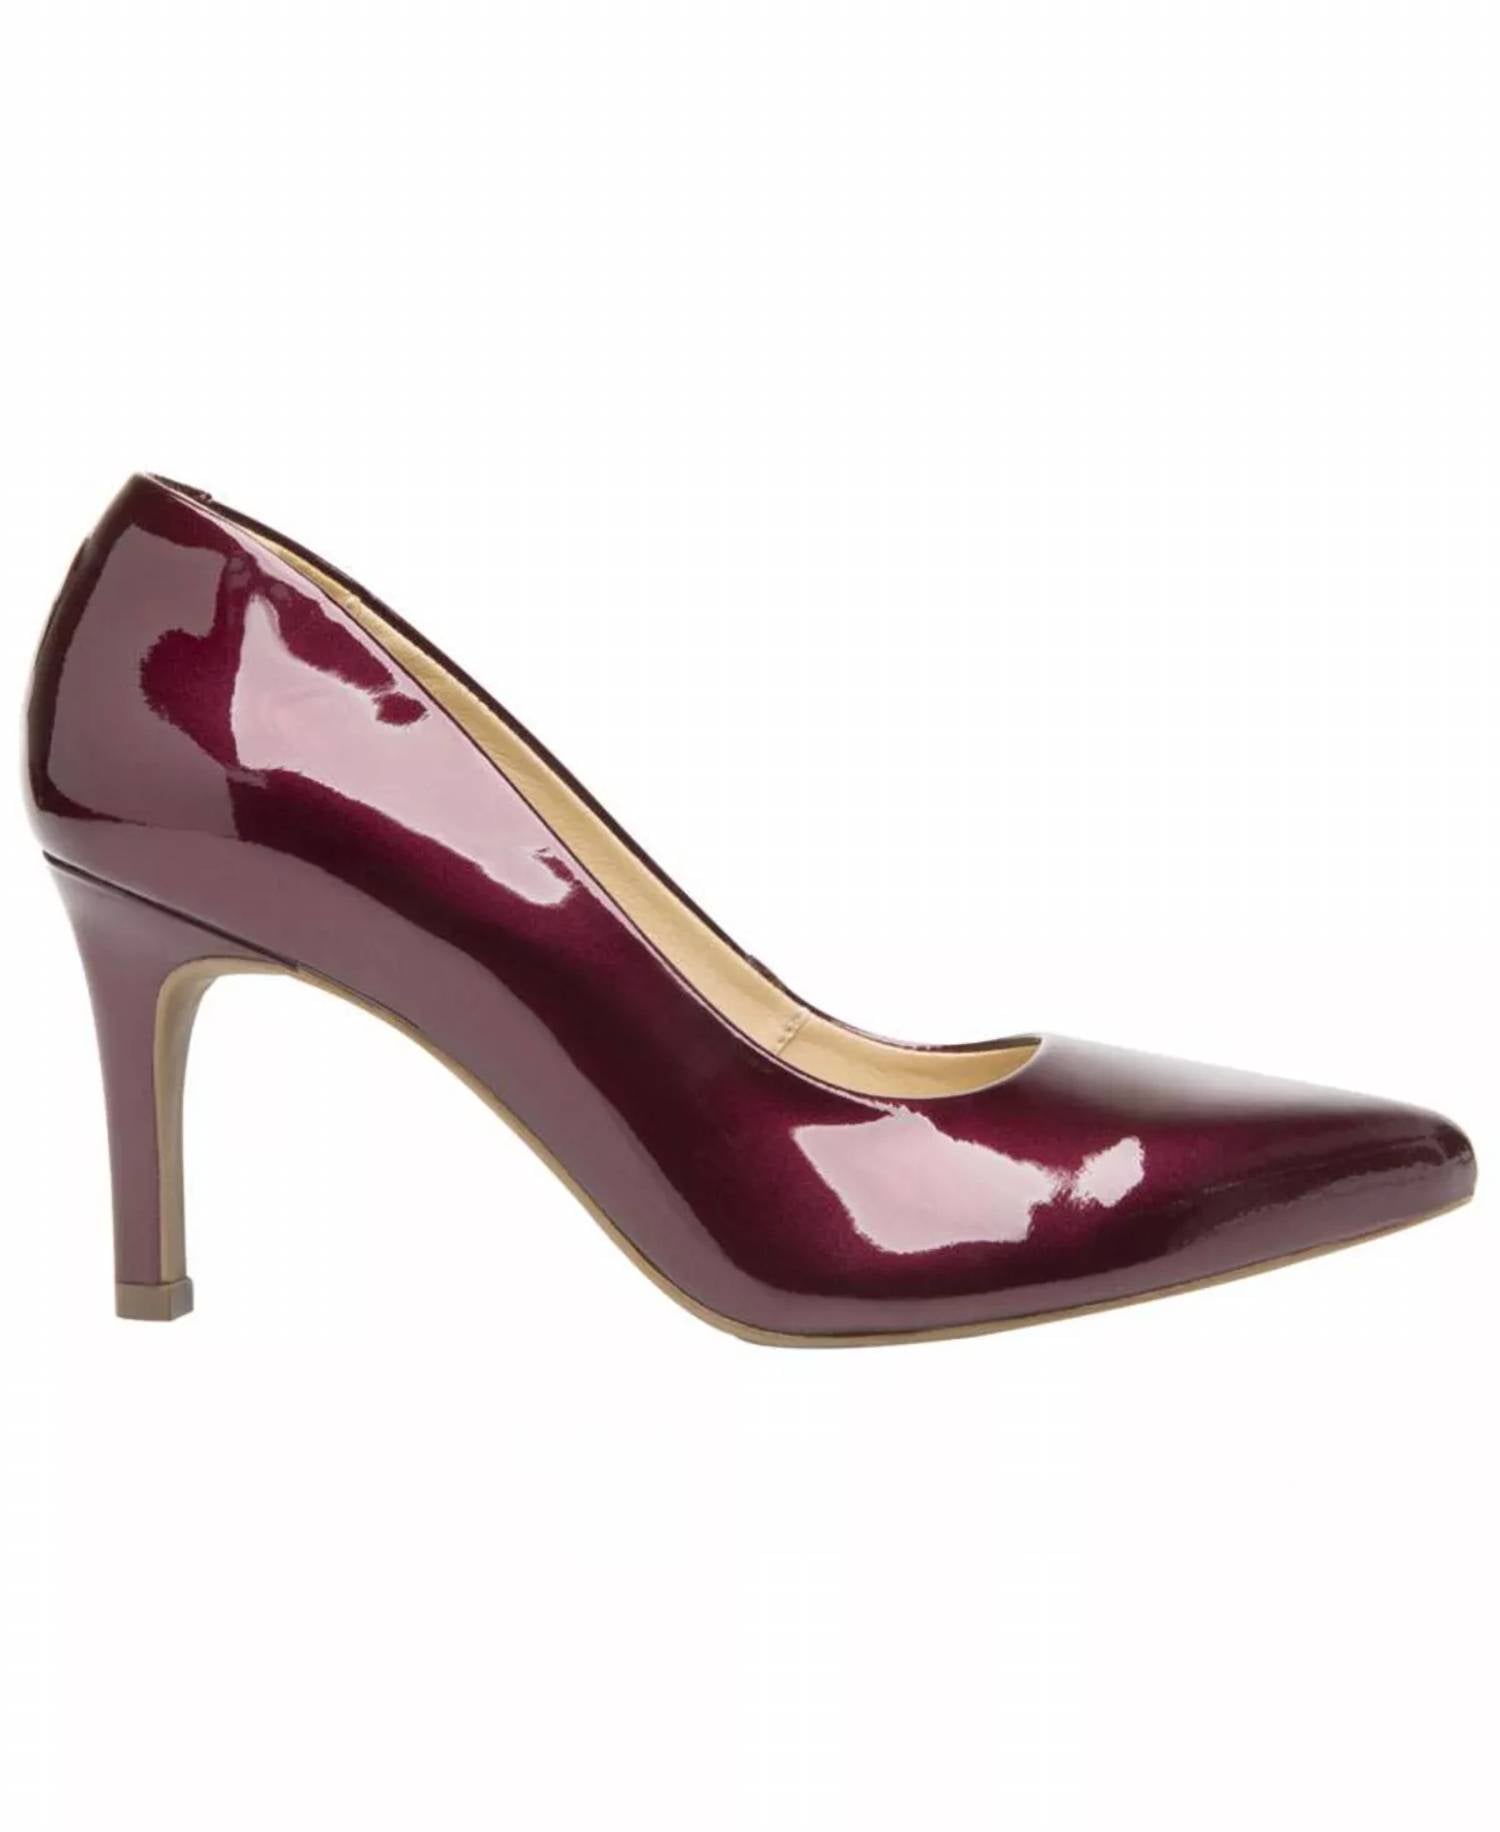 Flexi Patent Leather Dress Heels In Wine In Brown